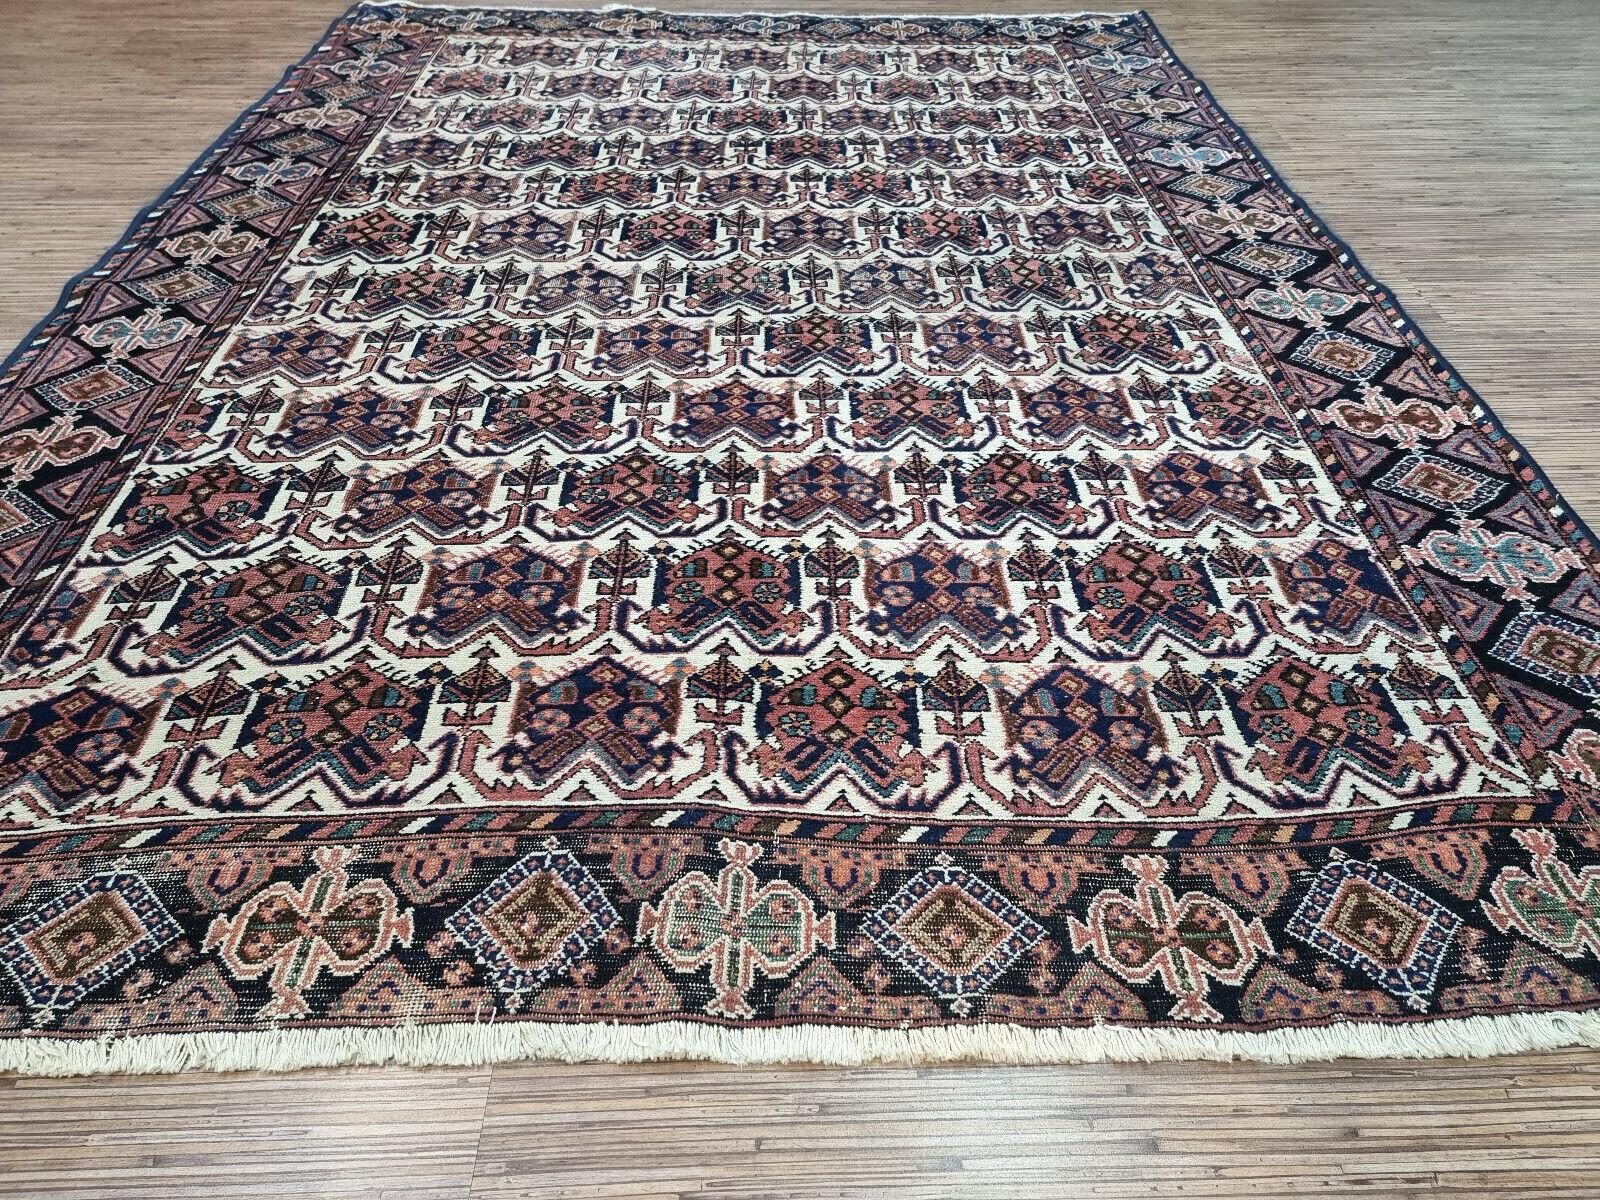 Hand-Knotted Handmade Antique Persian Style Afshar Rug 5.3' x 6.9', 1920s - 1D96 For Sale